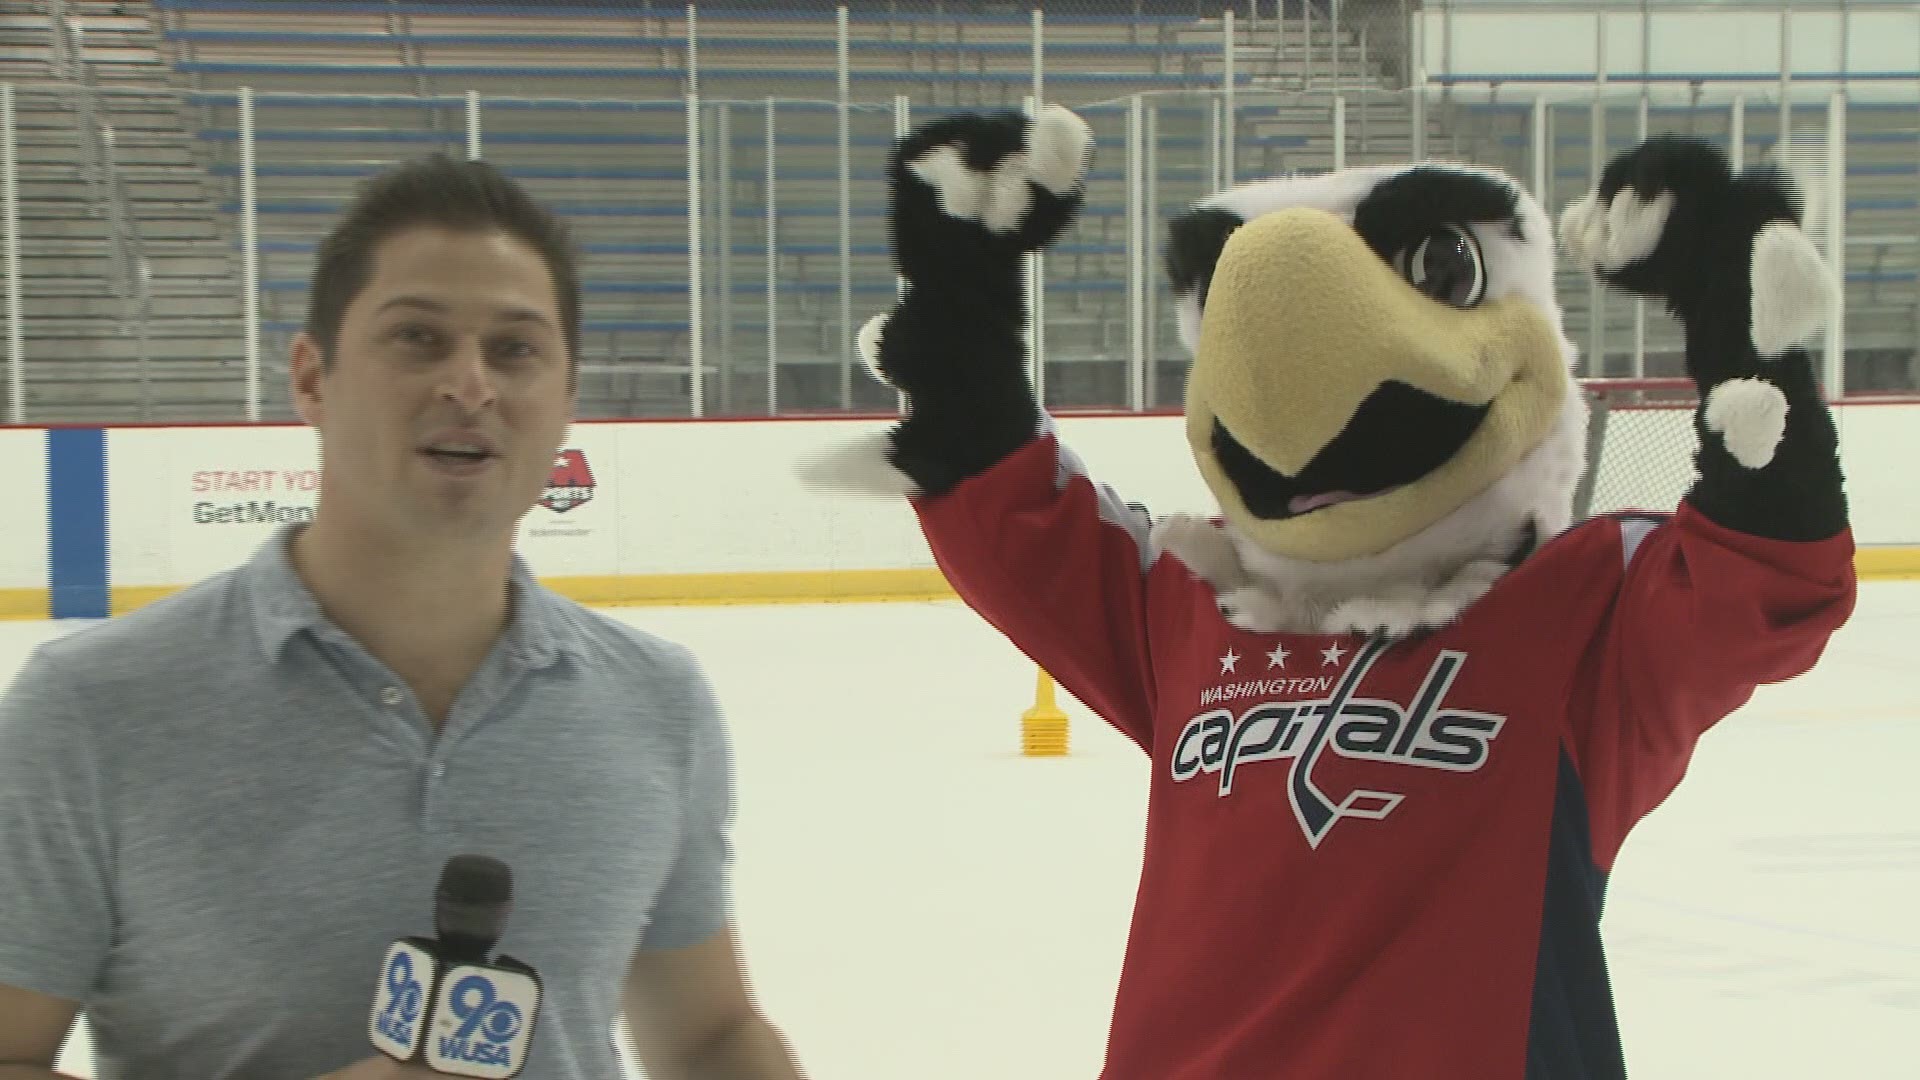 Typically it's professional athletes getting the attention at the Medstar Capitals Iceplex. But on a recent visit, WUSA9 couldn't help but notice Paul Mason.